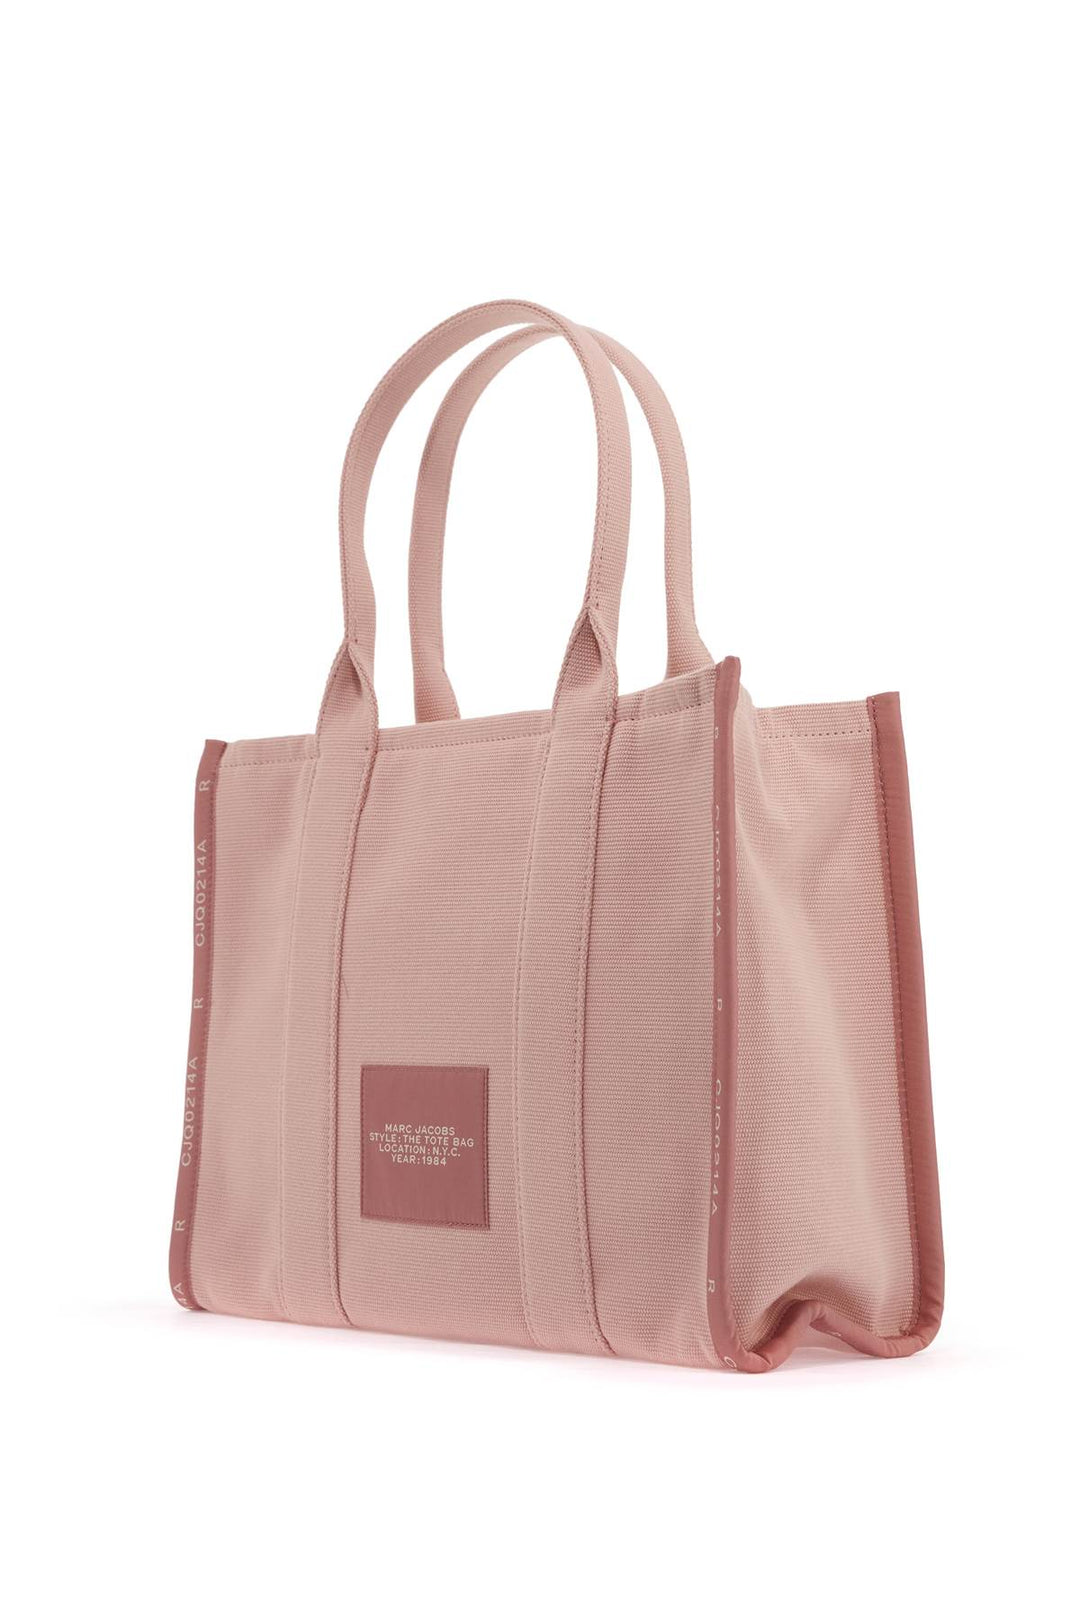 Marc Jacobs The Jacquard Large Tote Bag   Pink